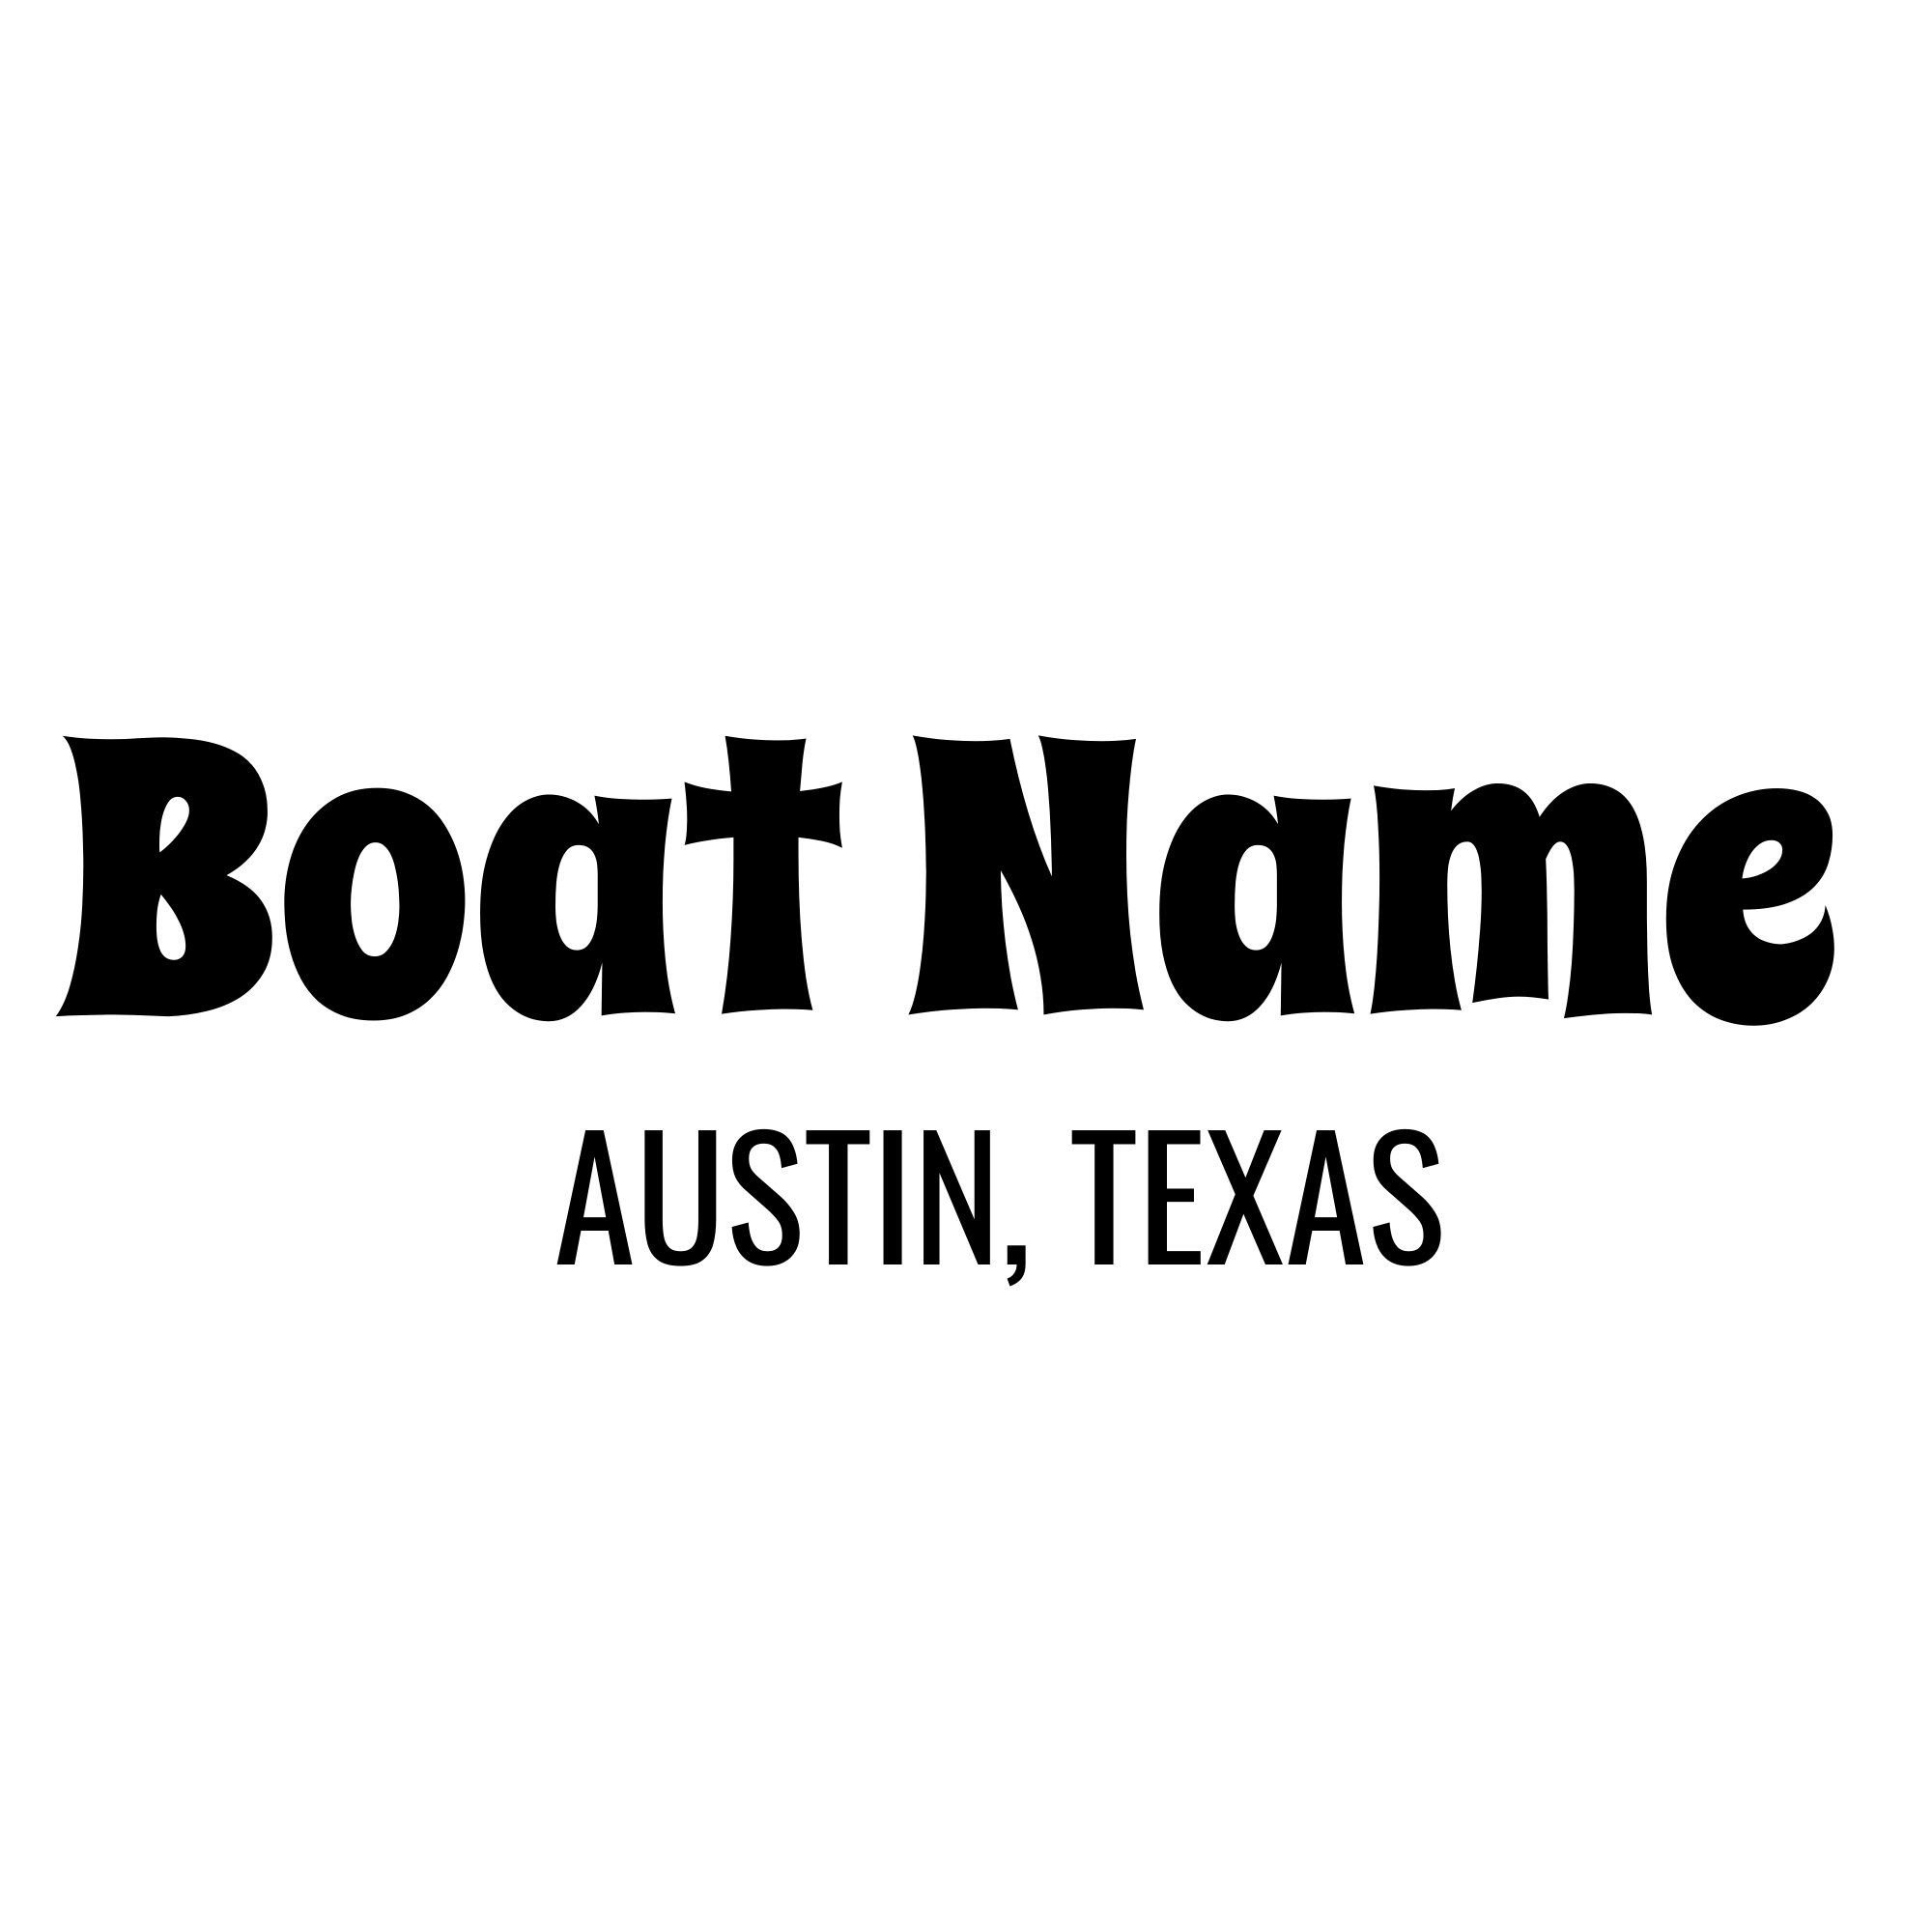 Personalized Boat Name Vinyl Decal with Hailing Port State - Permanent Marine-Grade for Signs, Speed boat, Fishing Vessel, Watercraft D23, B1